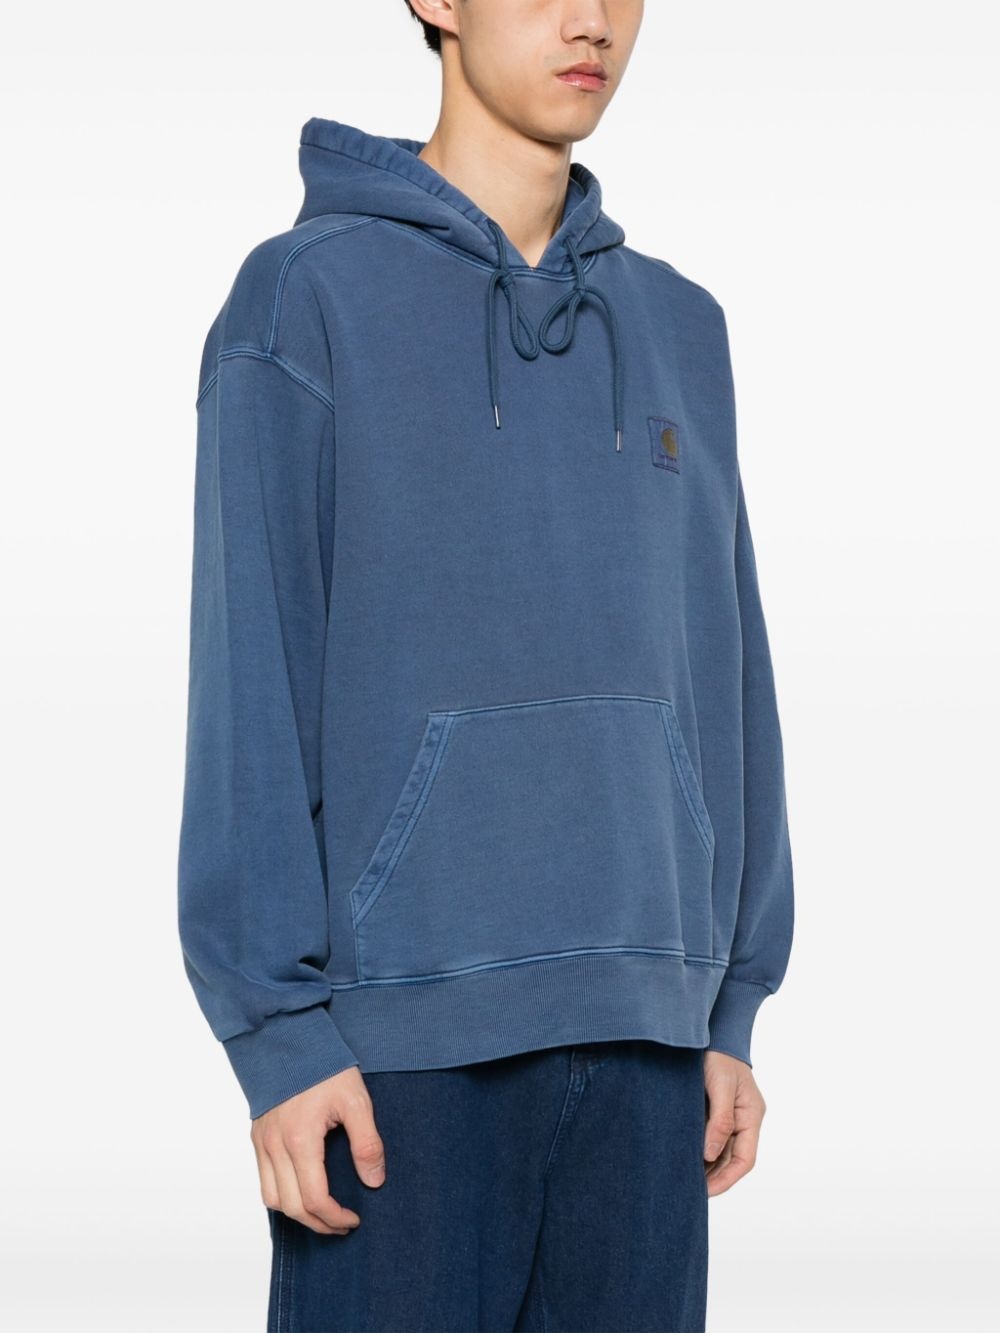 Nelson logo-patch hoodie - 3